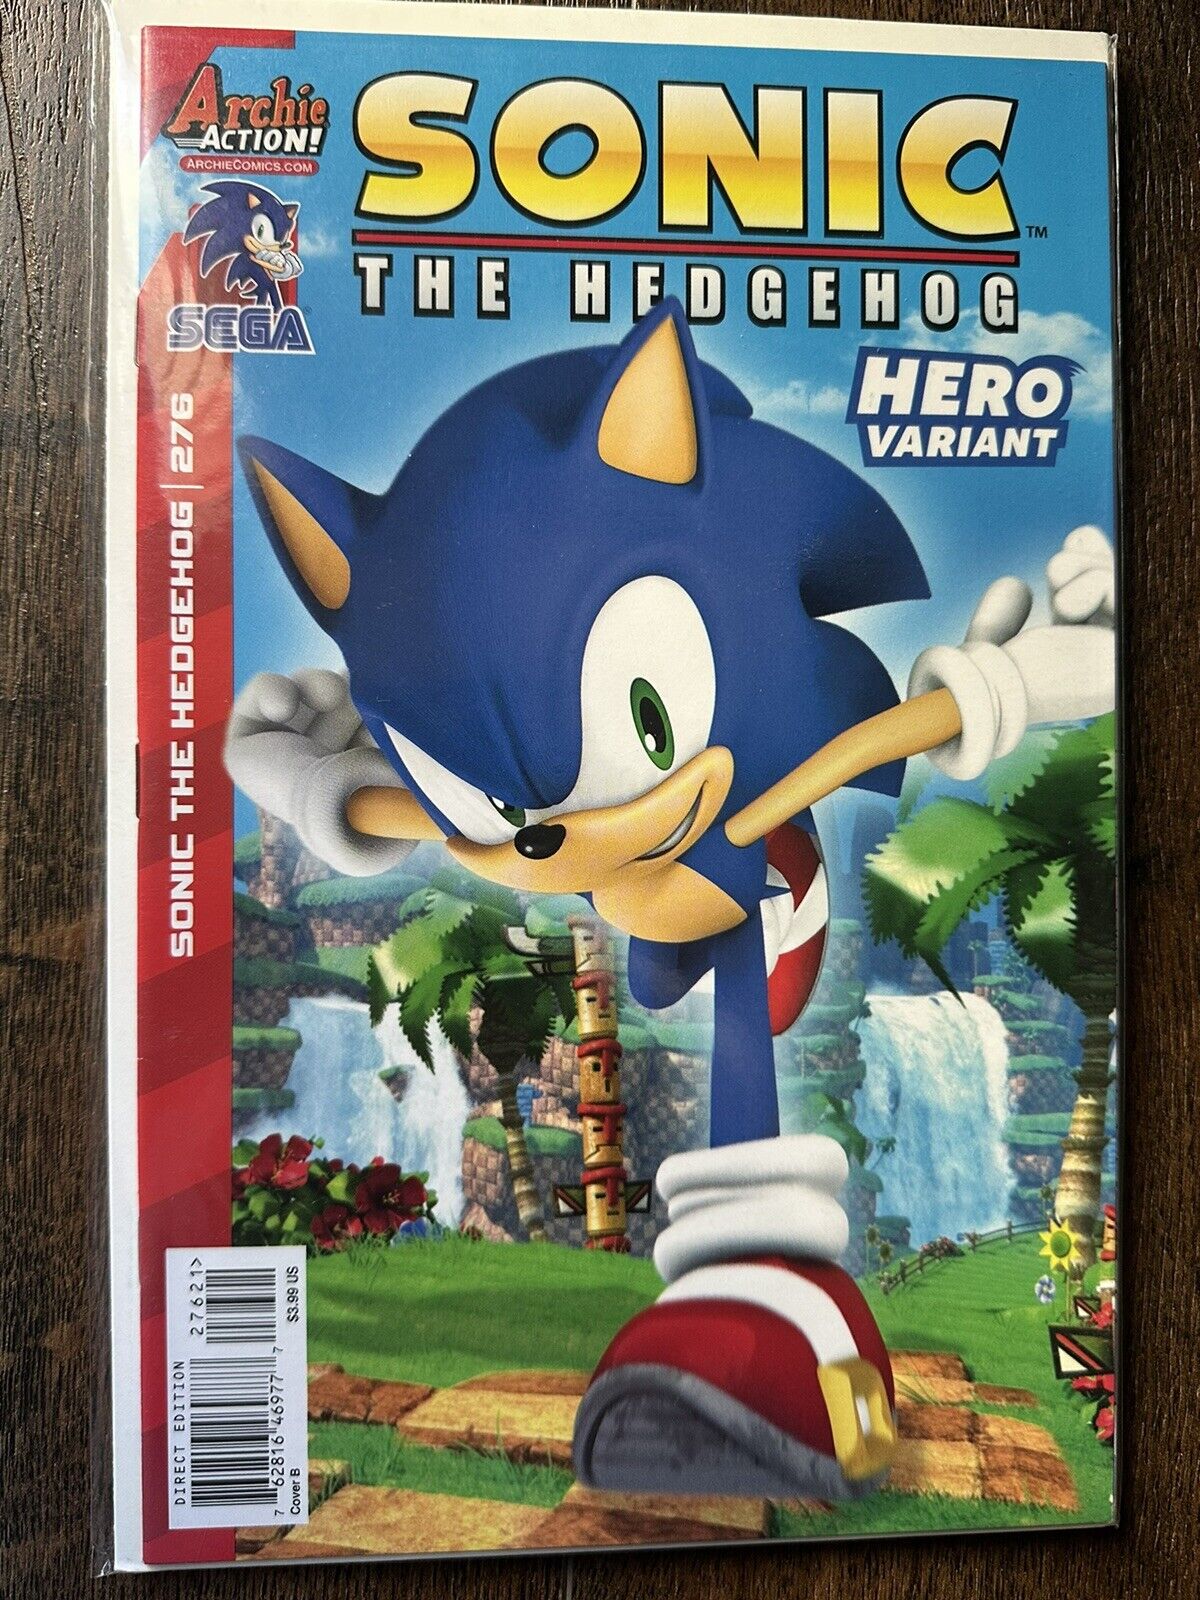 Sonic The Hedgehog #276 Archie Comics Hero Variant Cover